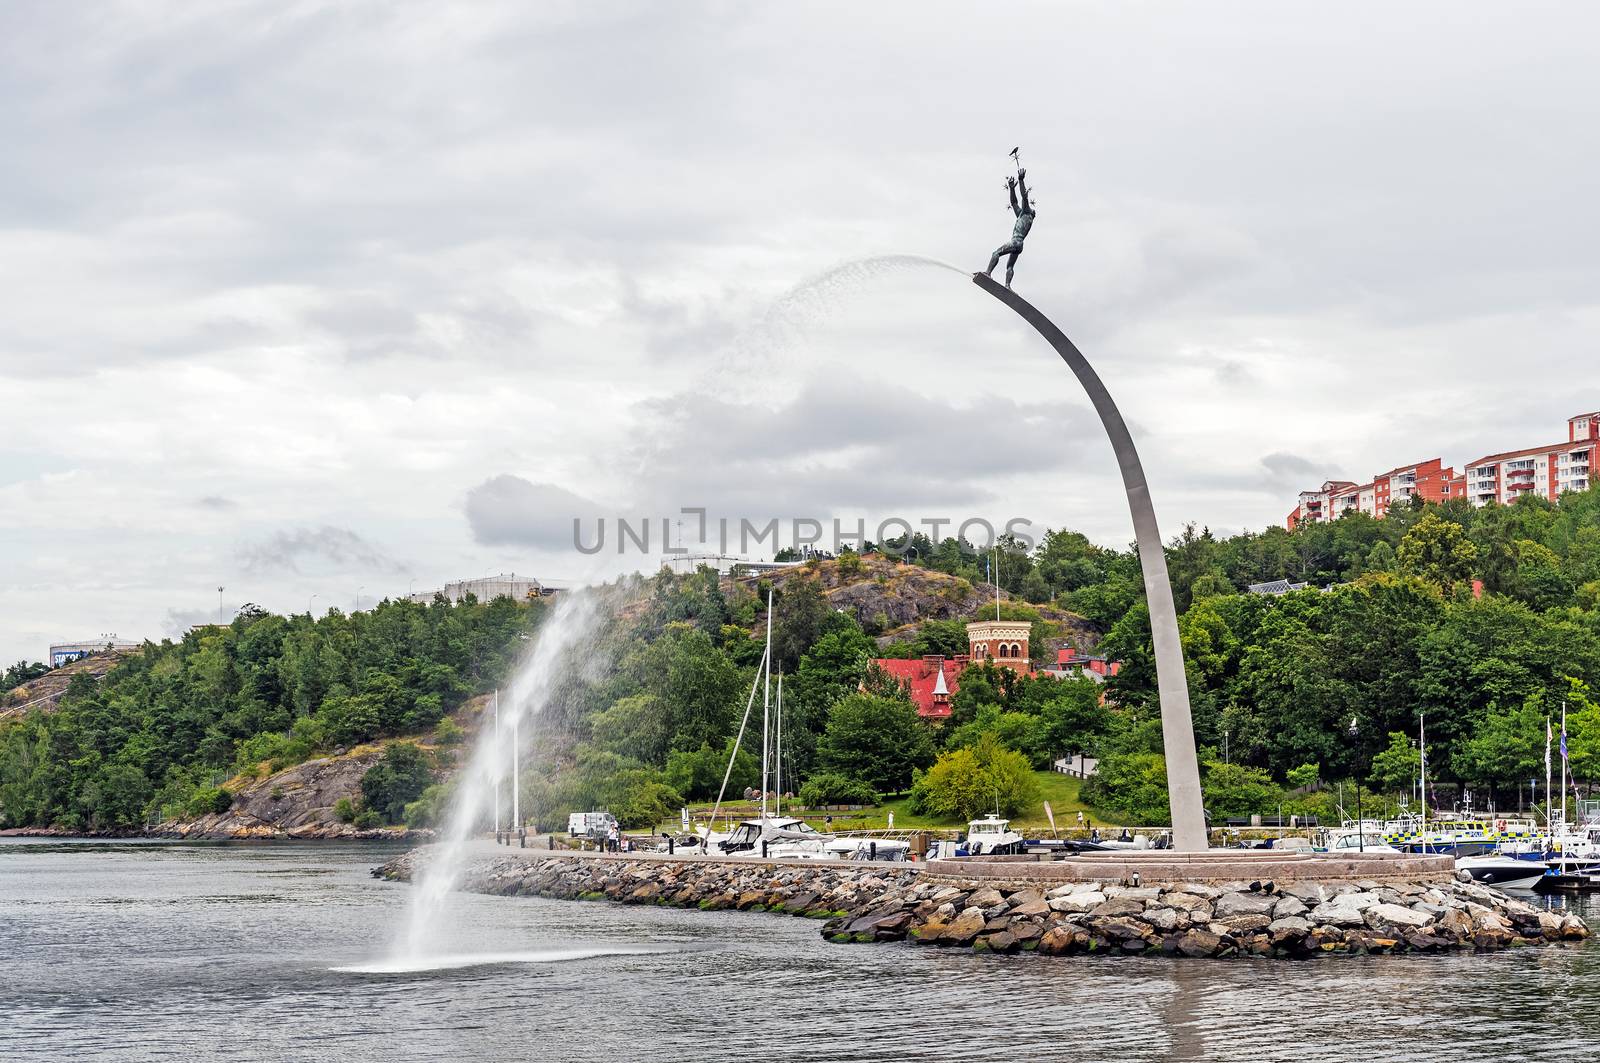 The famous sculpture God our Father on the Rainbow at Nacka Strand. Designed by Carl Milles (1875-1955) in 1946 as a tribute for peace and founding the United Nations.